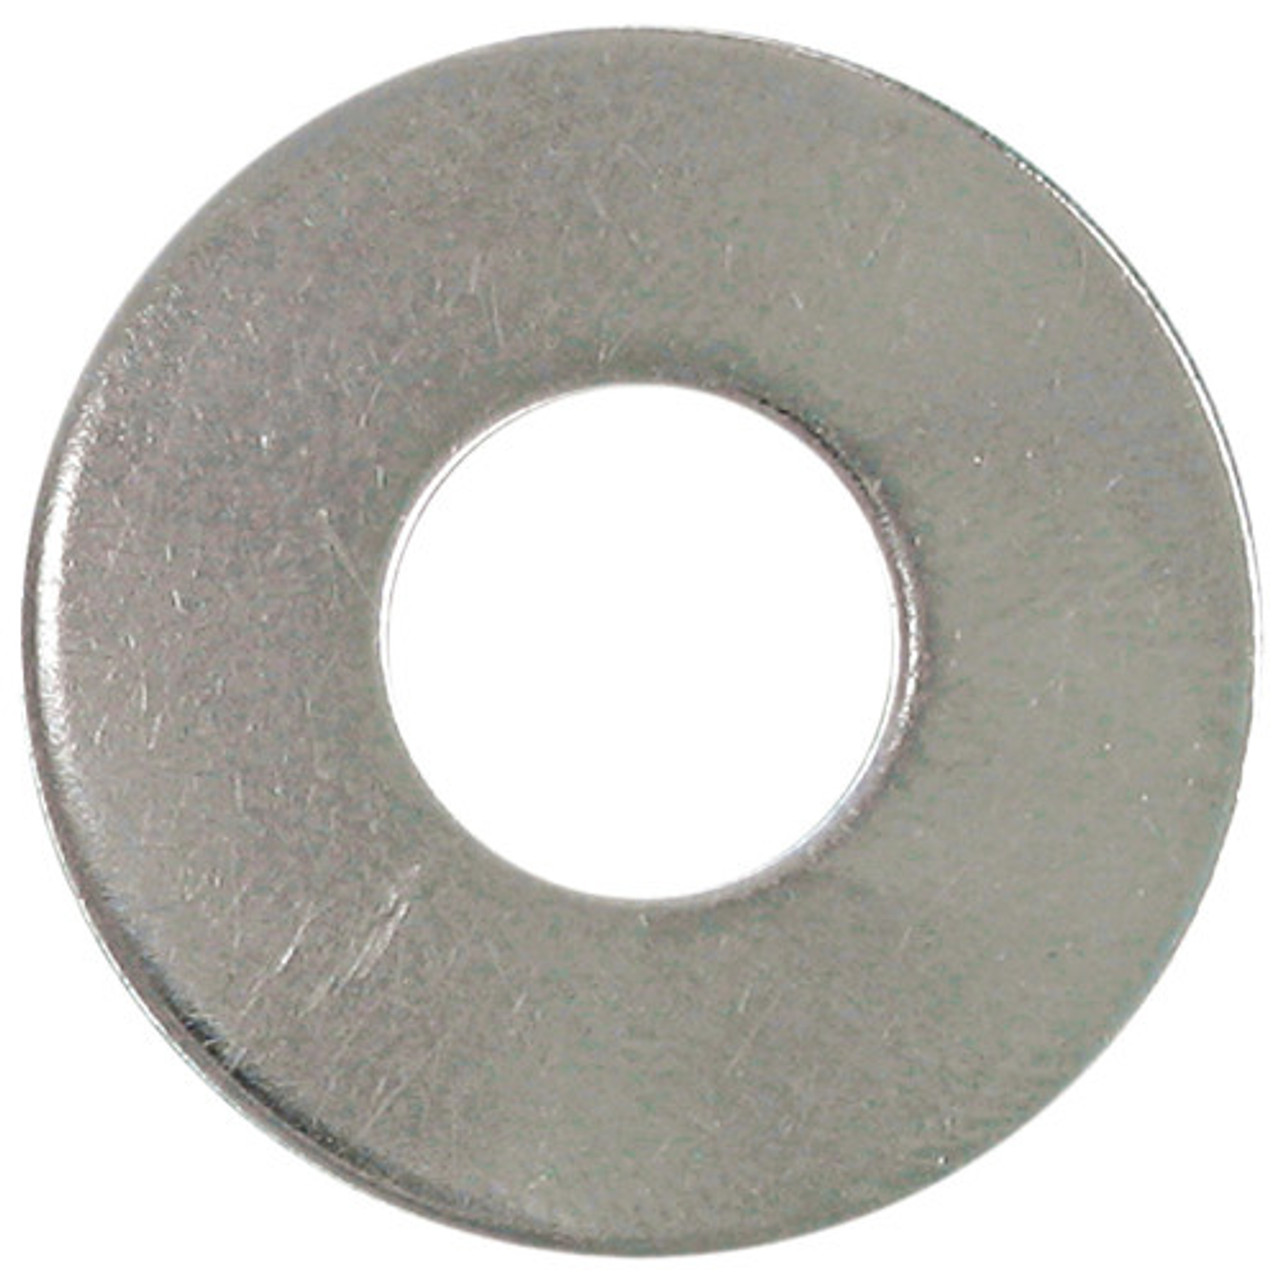 11/16" Zinc Plated Spacer Washer 100 Pc.   162-925